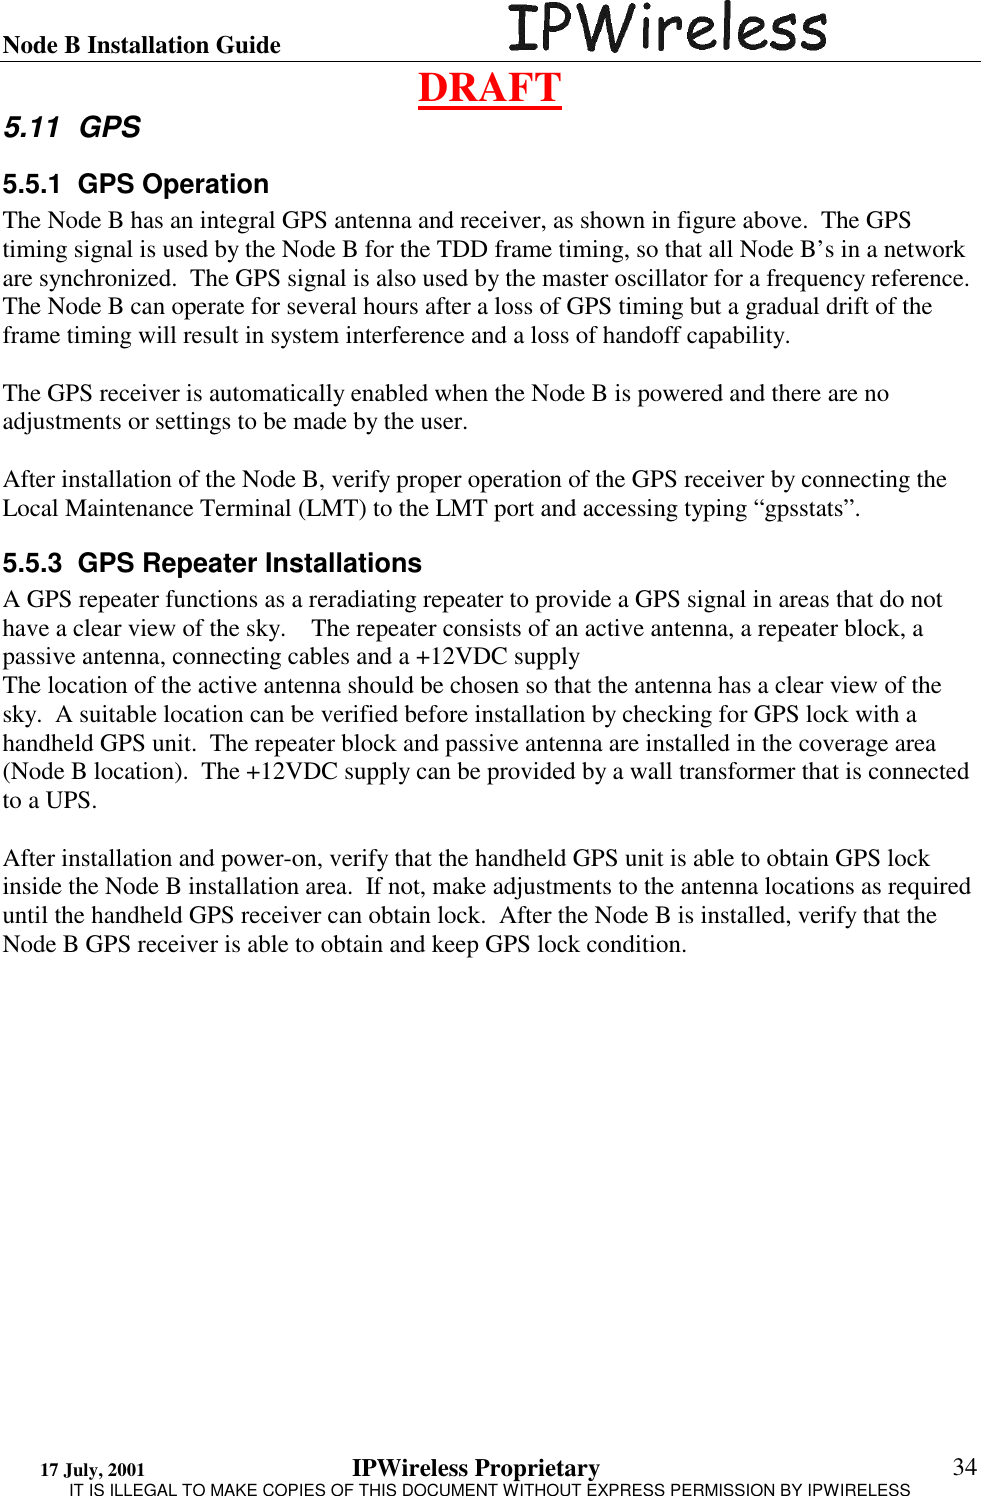 Node B Installation Guide                                      DRAFT 17 July, 2001                                 IPWireless Proprietary                                                  IT IS ILLEGAL TO MAKE COPIES OF THIS DOCUMENT WITHOUT EXPRESS PERMISSION BY IPWIRELESS  34 5.11 GPS 5.5.1 GPS Operation The Node B has an integral GPS antenna and receiver, as shown in figure above.  The GPS timing signal is used by the Node B for the TDD frame timing, so that all Node B’s in a network are synchronized.  The GPS signal is also used by the master oscillator for a frequency reference.  The Node B can operate for several hours after a loss of GPS timing but a gradual drift of the frame timing will result in system interference and a loss of handoff capability.  The GPS receiver is automatically enabled when the Node B is powered and there are no adjustments or settings to be made by the user.  After installation of the Node B, verify proper operation of the GPS receiver by connecting the Local Maintenance Terminal (LMT) to the LMT port and accessing typing “gpsstats”.  5.5.3  GPS Repeater Installations A GPS repeater functions as a reradiating repeater to provide a GPS signal in areas that do not have a clear view of the sky.    The repeater consists of an active antenna, a repeater block, a passive antenna, connecting cables and a +12VDC supply The location of the active antenna should be chosen so that the antenna has a clear view of the sky.  A suitable location can be verified before installation by checking for GPS lock with a handheld GPS unit.  The repeater block and passive antenna are installed in the coverage area (Node B location).  The +12VDC supply can be provided by a wall transformer that is connected to a UPS.  After installation and power-on, verify that the handheld GPS unit is able to obtain GPS lock inside the Node B installation area.  If not, make adjustments to the antenna locations as required until the handheld GPS receiver can obtain lock.  After the Node B is installed, verify that the Node B GPS receiver is able to obtain and keep GPS lock condition. 